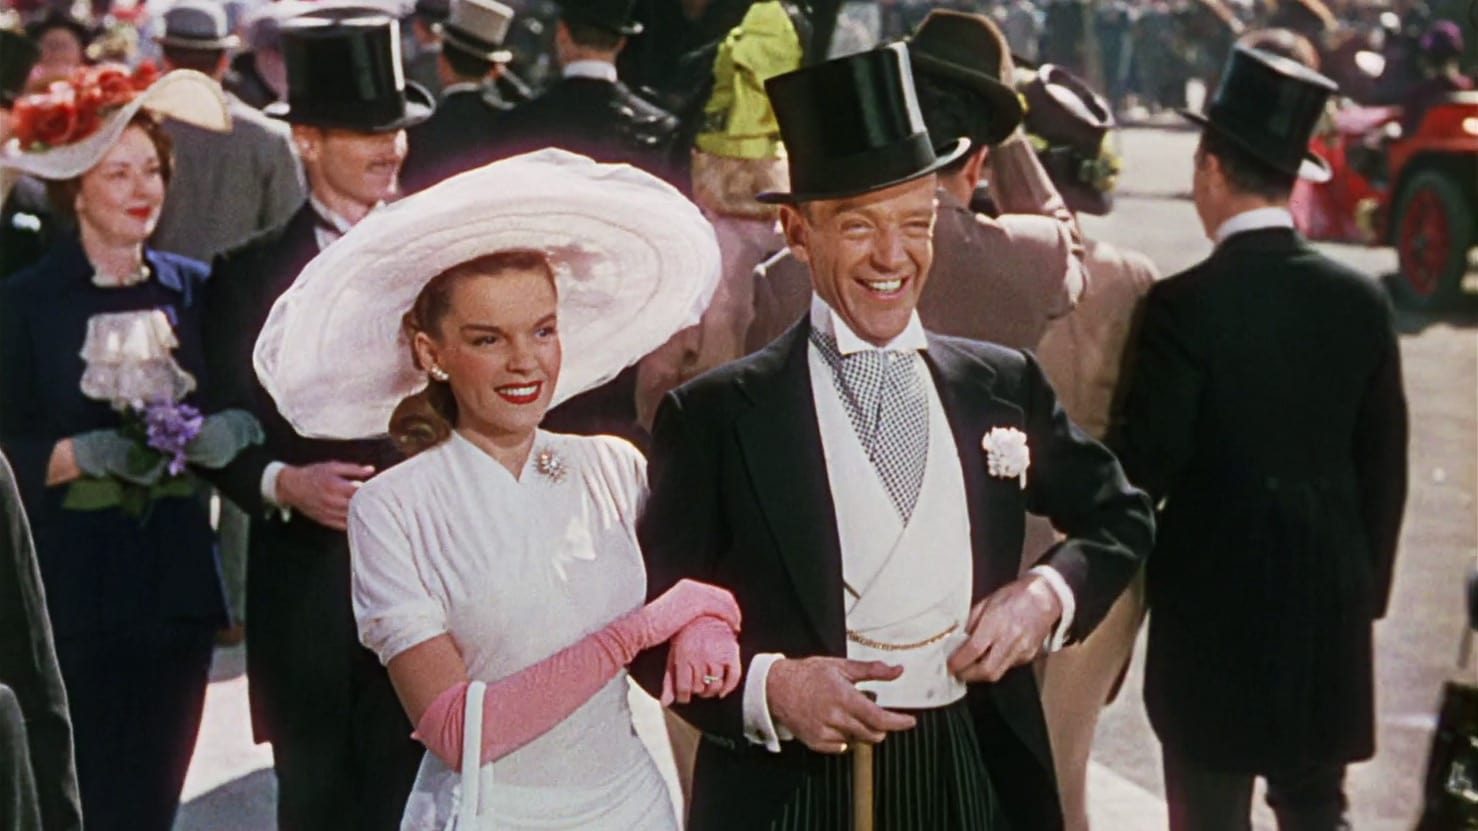 Easter Parade 1948 123movies